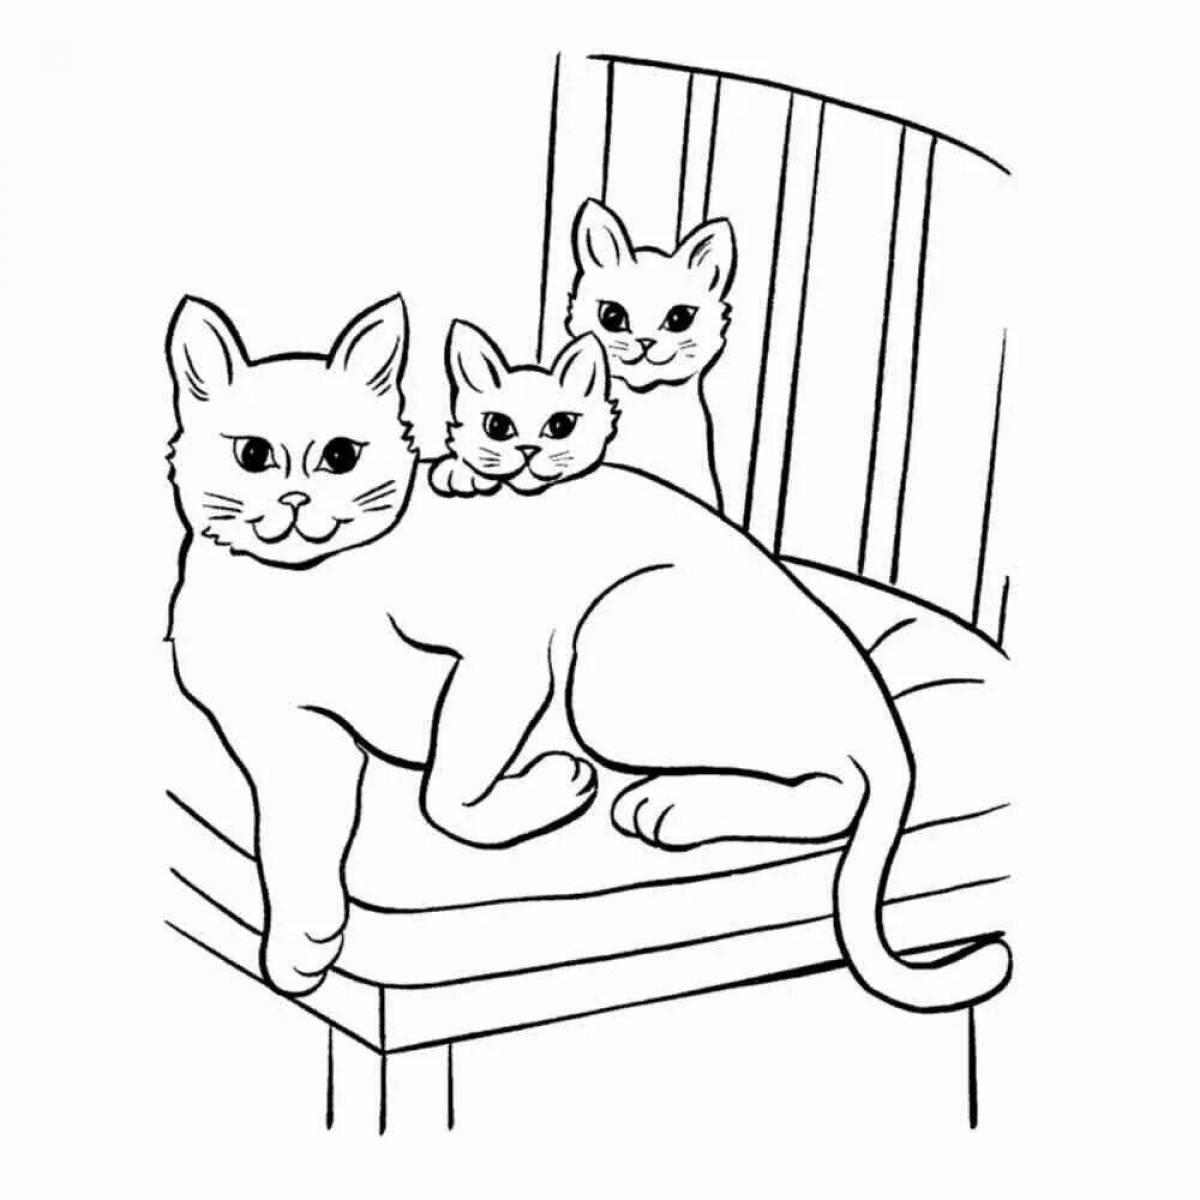 Coloring page happy cat